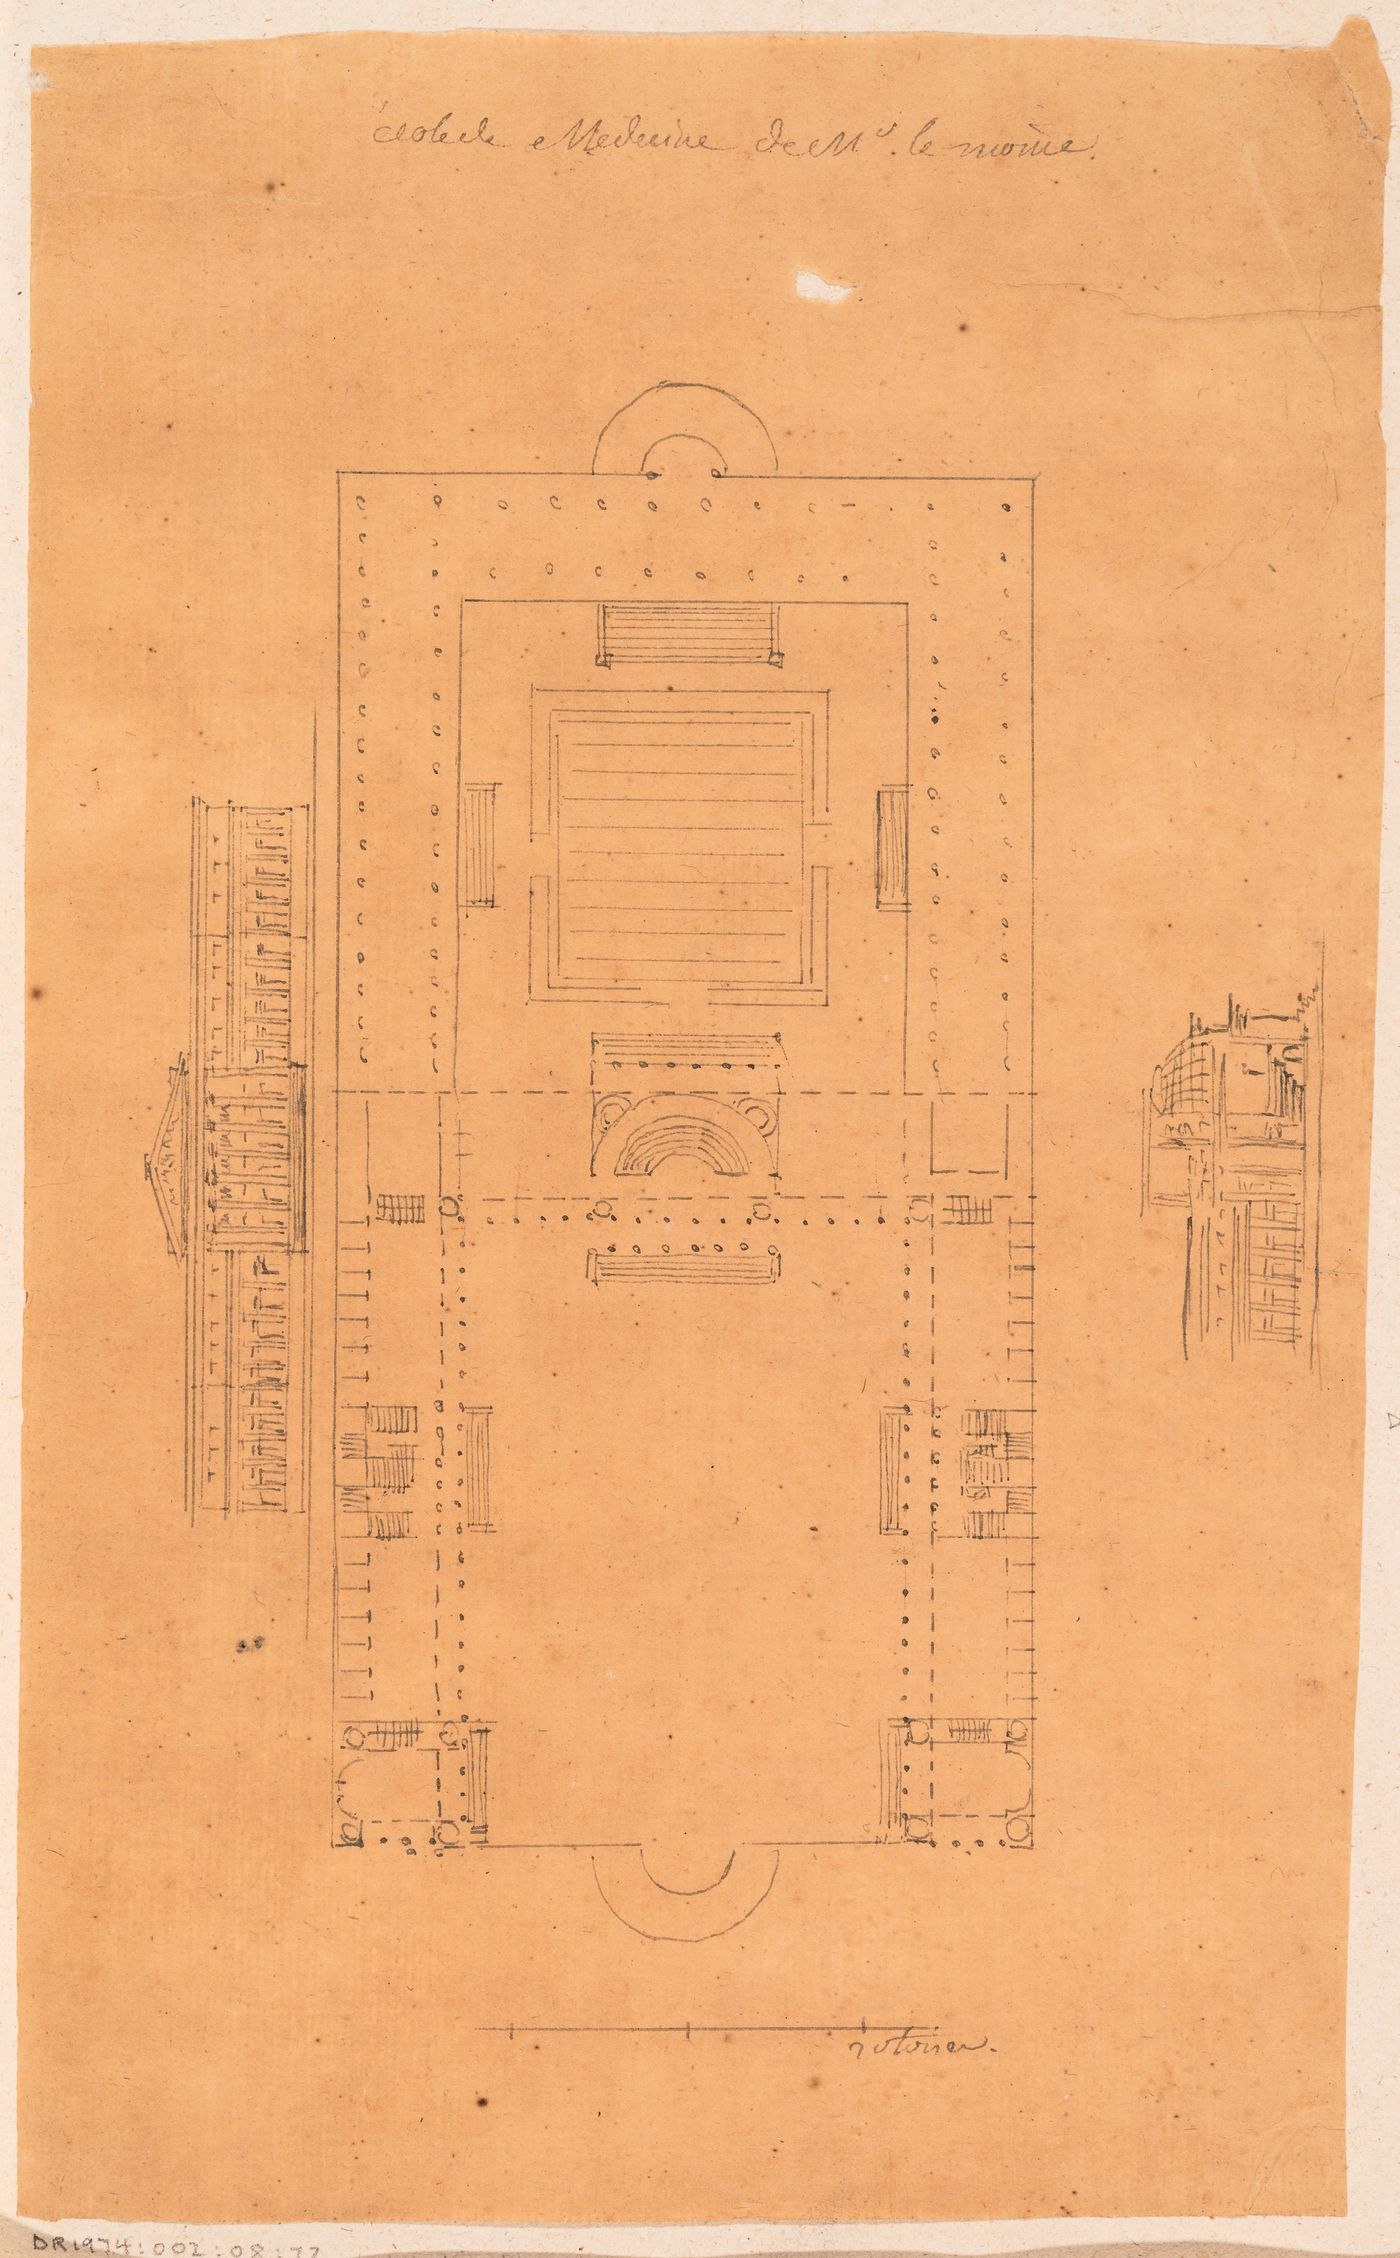 1775 Grand Prix Competition: Plan of an École de médecine and other medical buildings